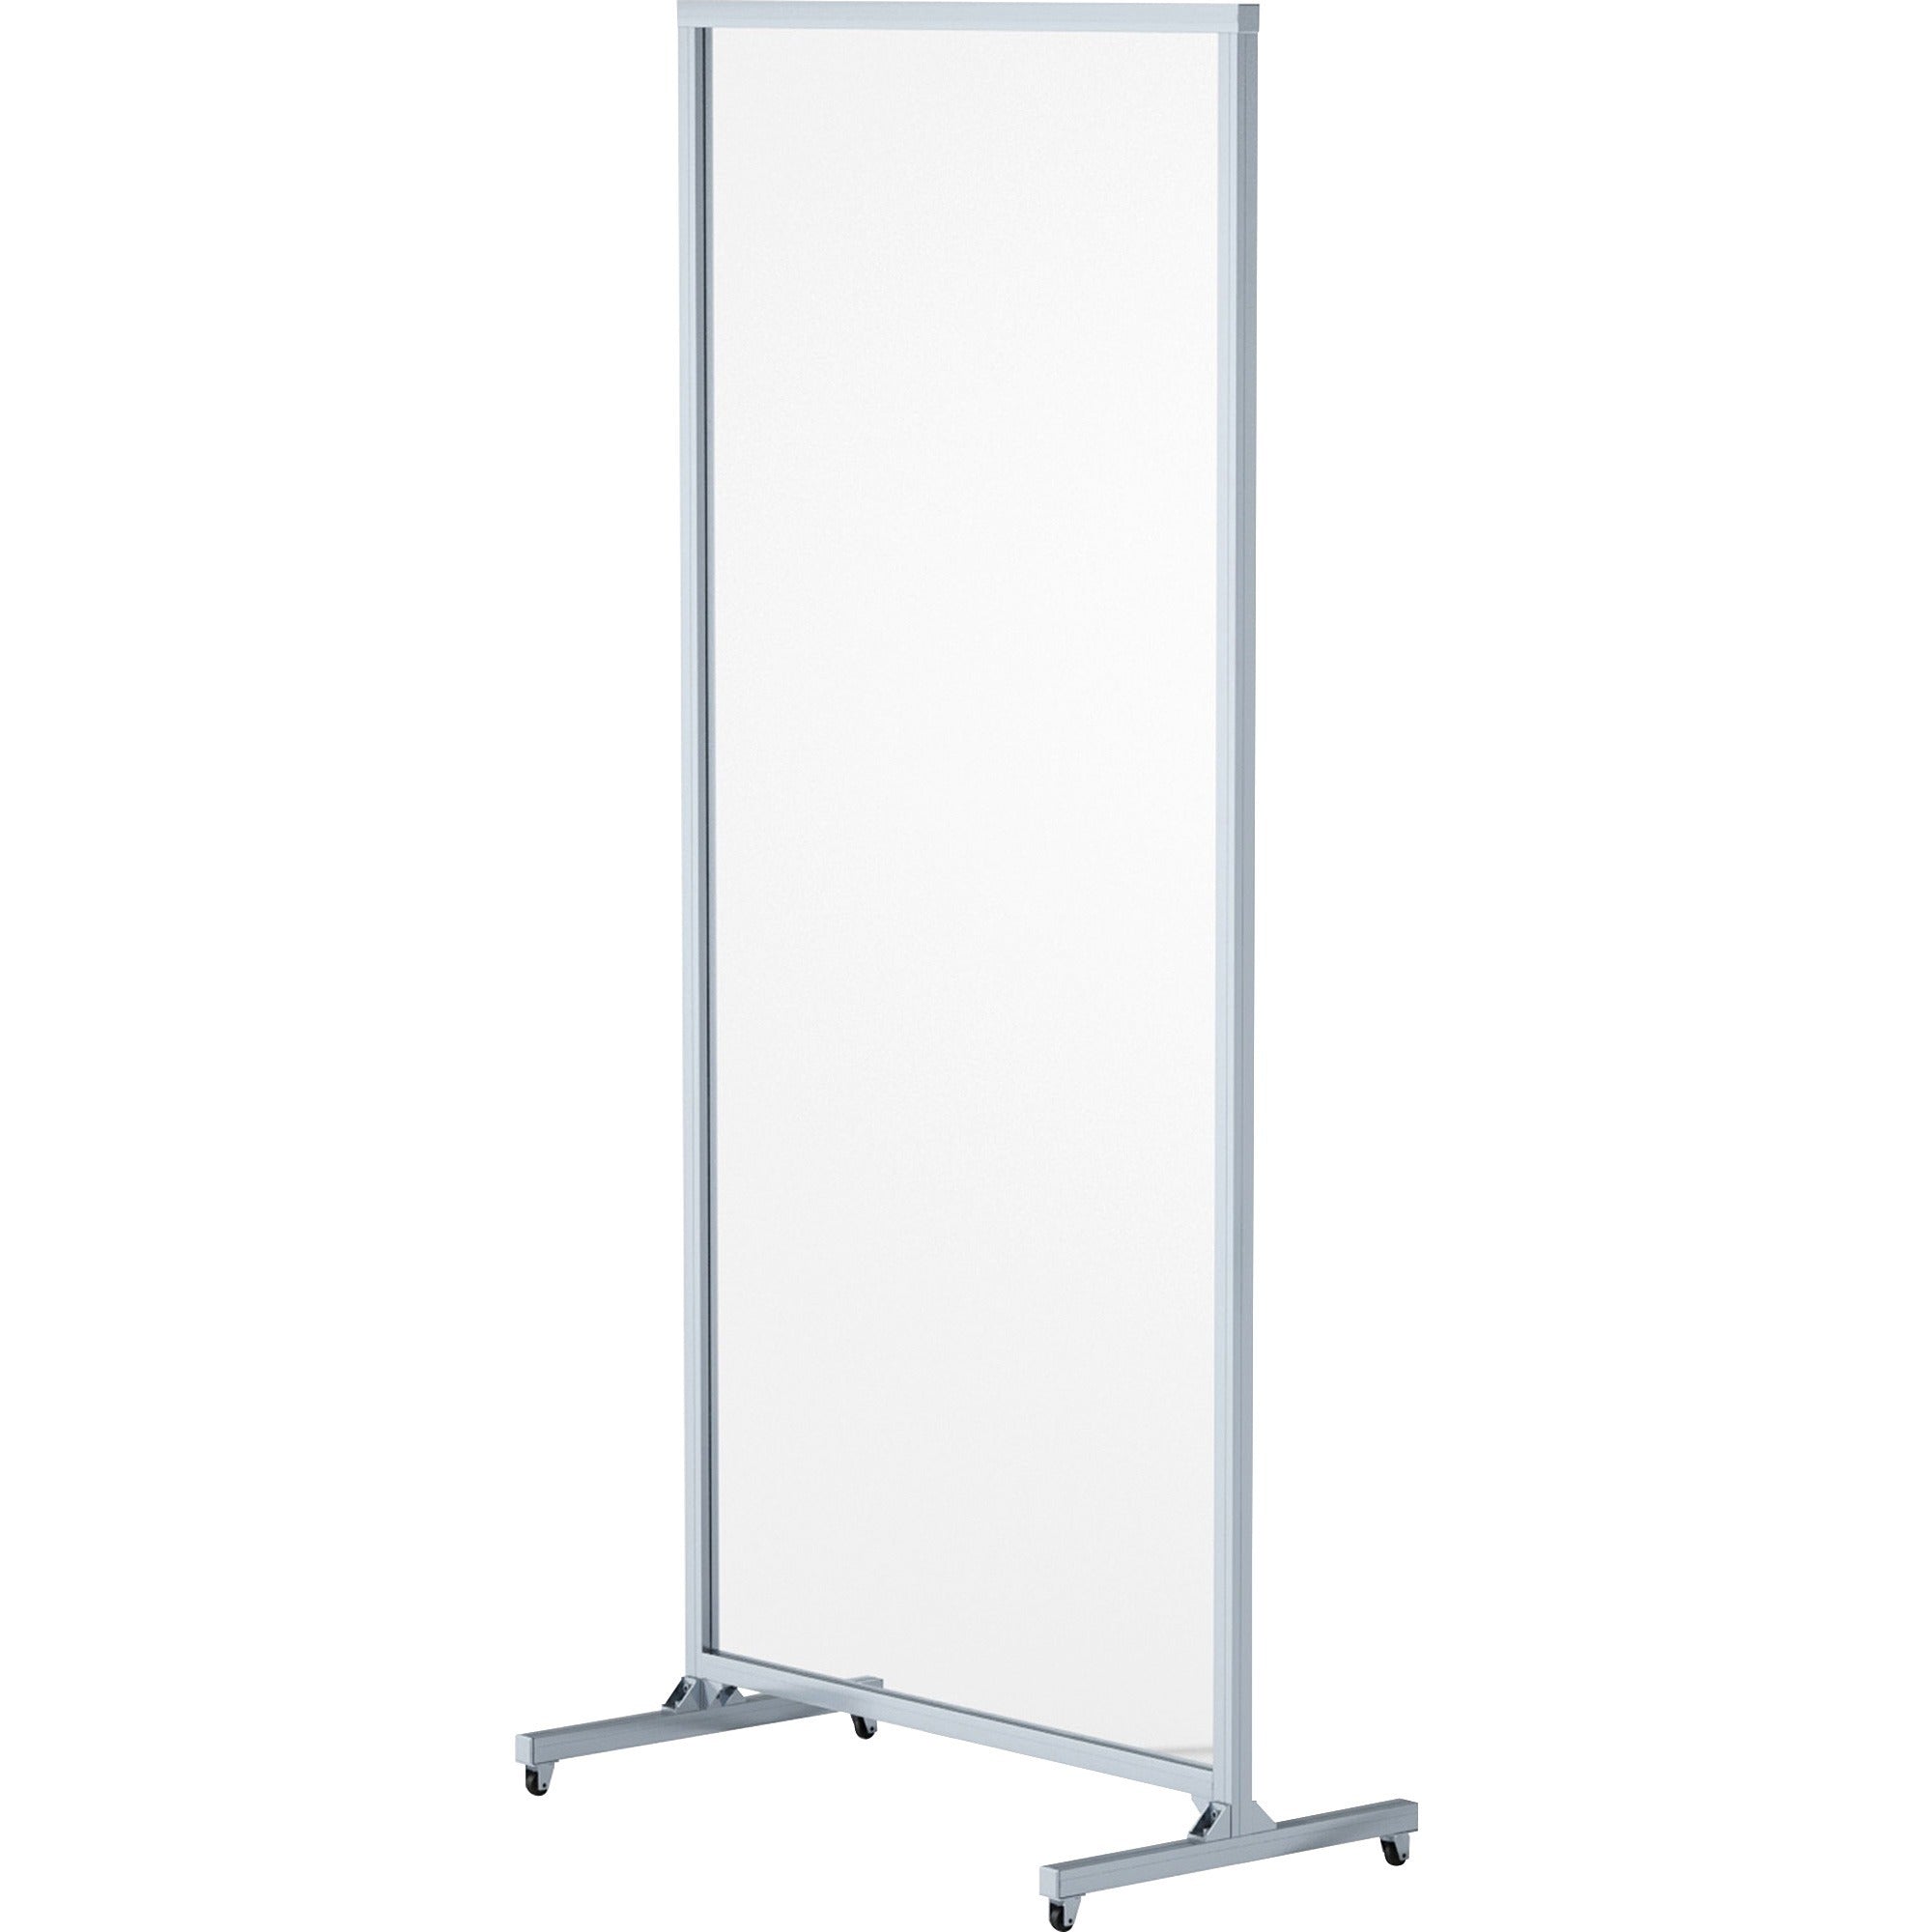 lorell-mobile-full-protective-glass-screen-36-width-x-03-depth-x-78-height-1-each-clear-tempered-glass-aluminum_llr55673 - 1